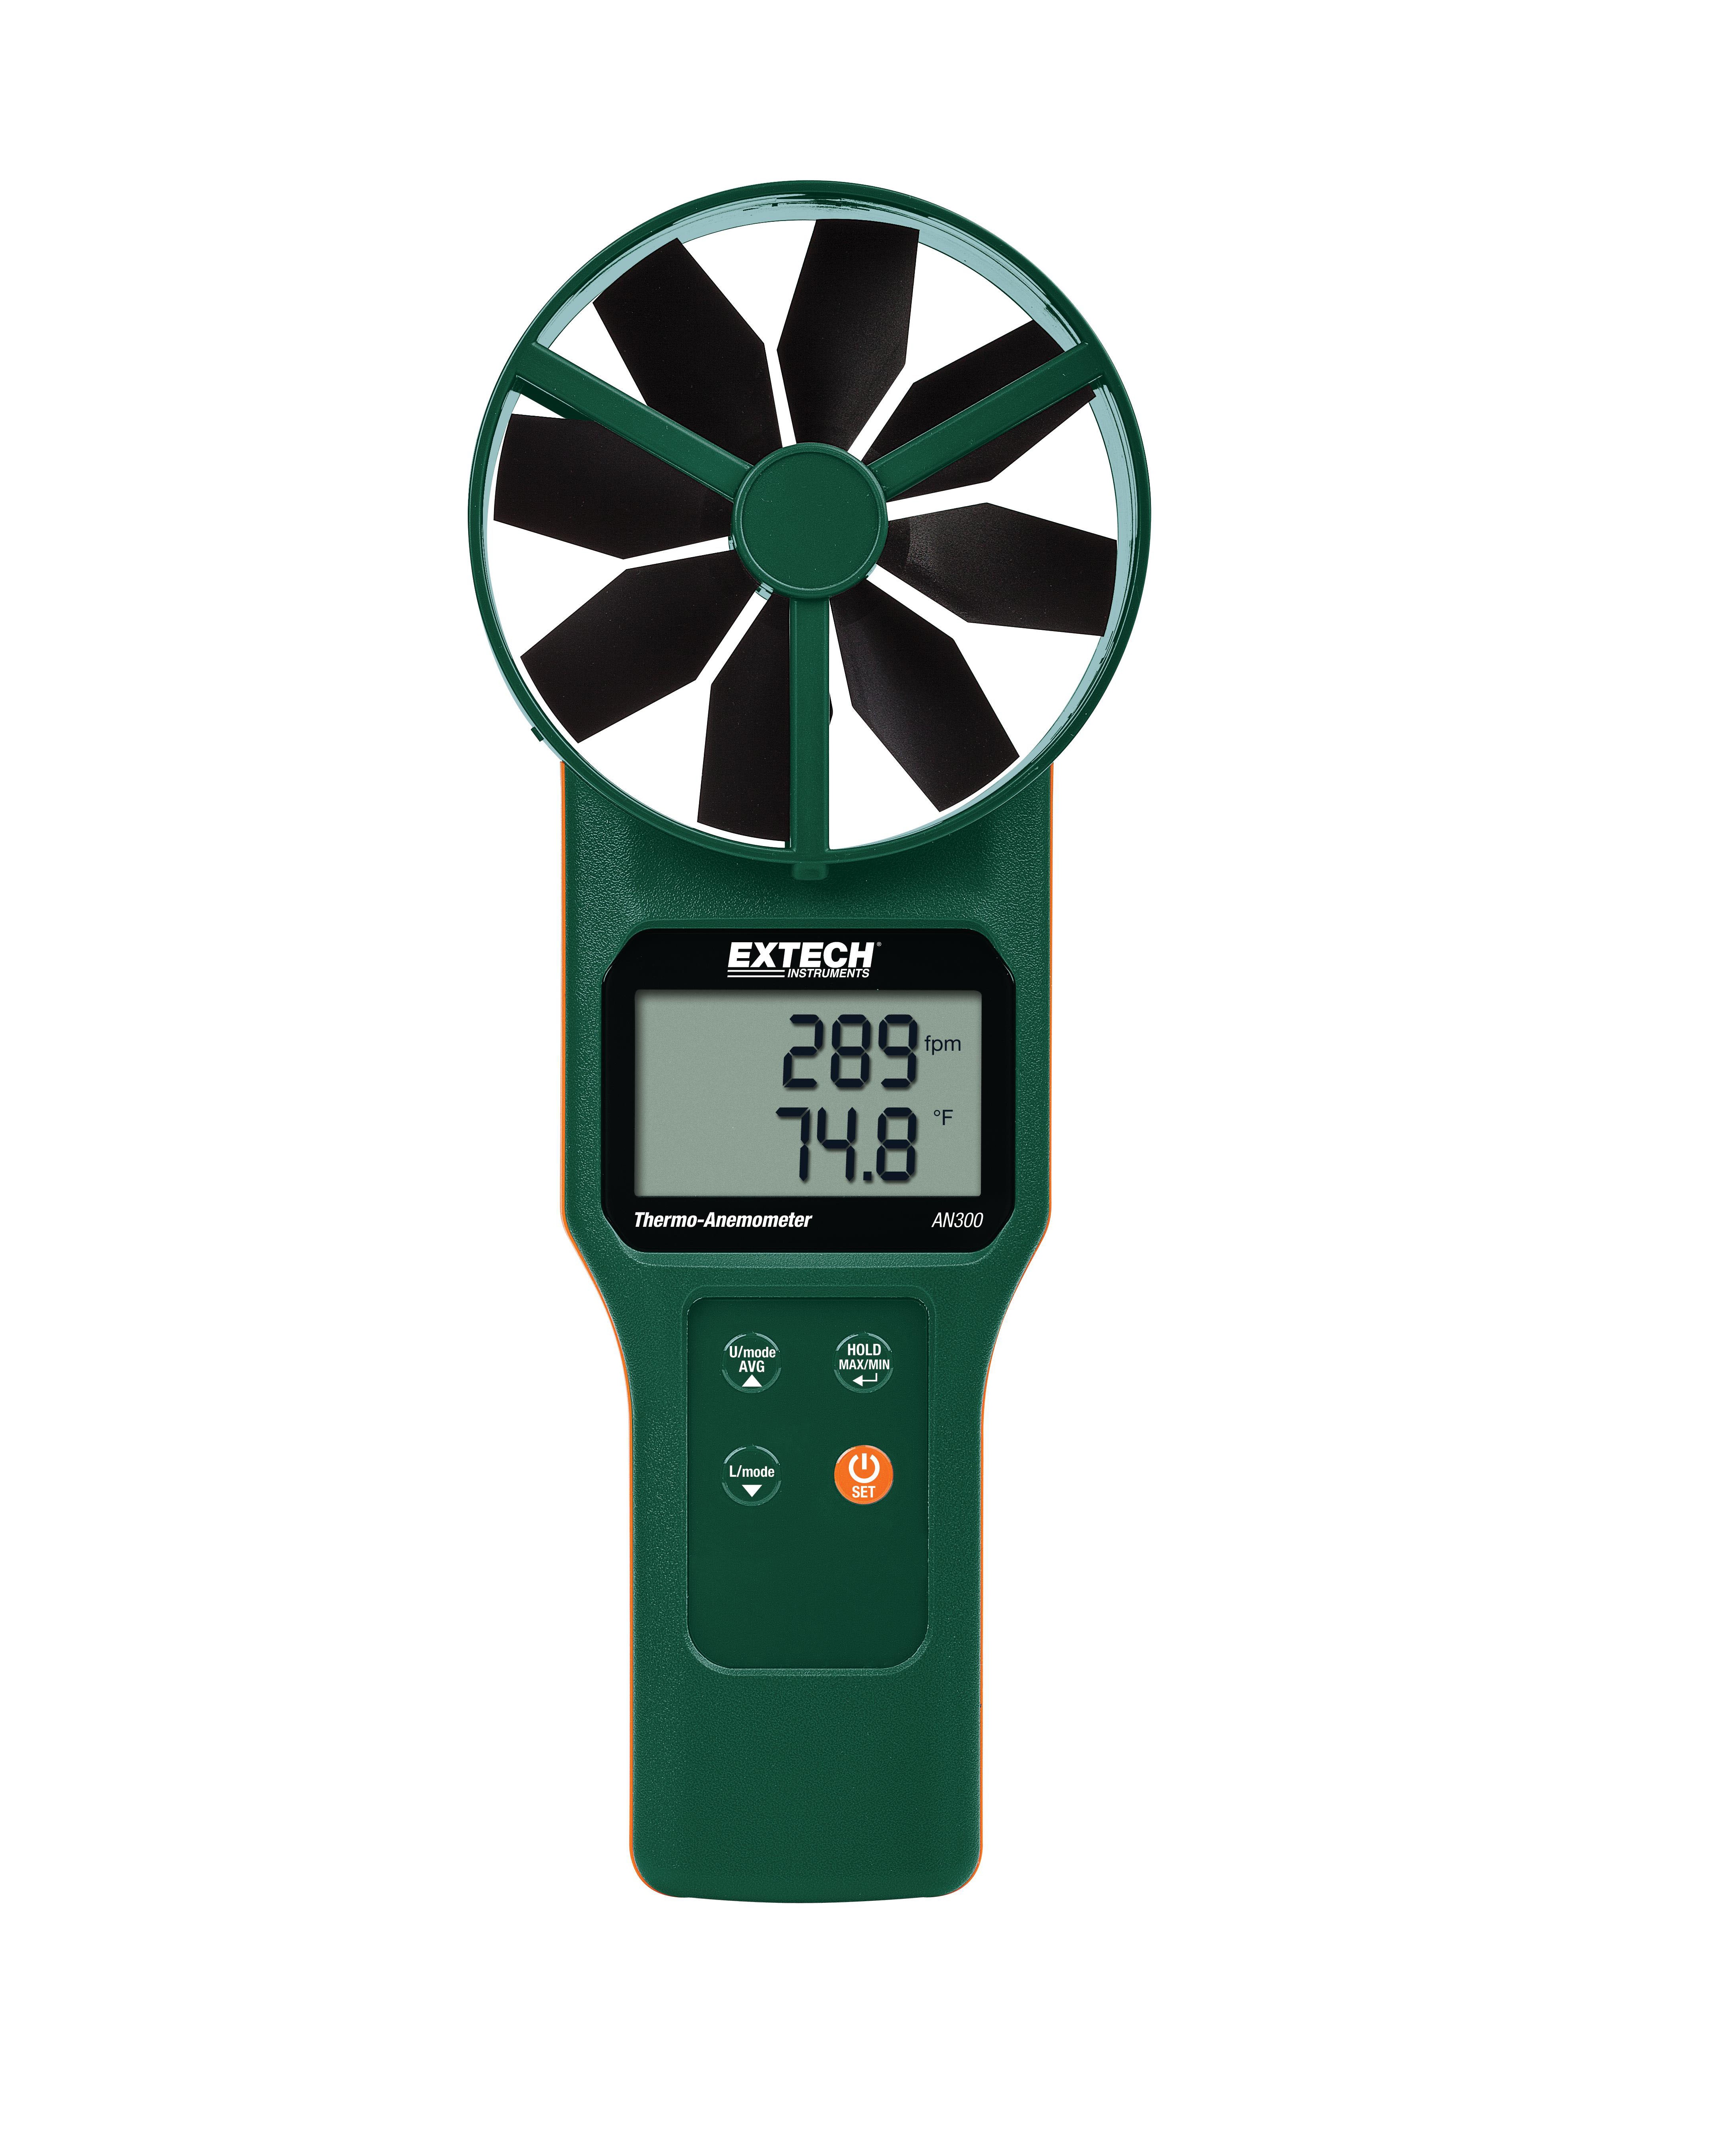 EXTECH AN300 - Large Vane CFM/CMM Thermo-Anemometer